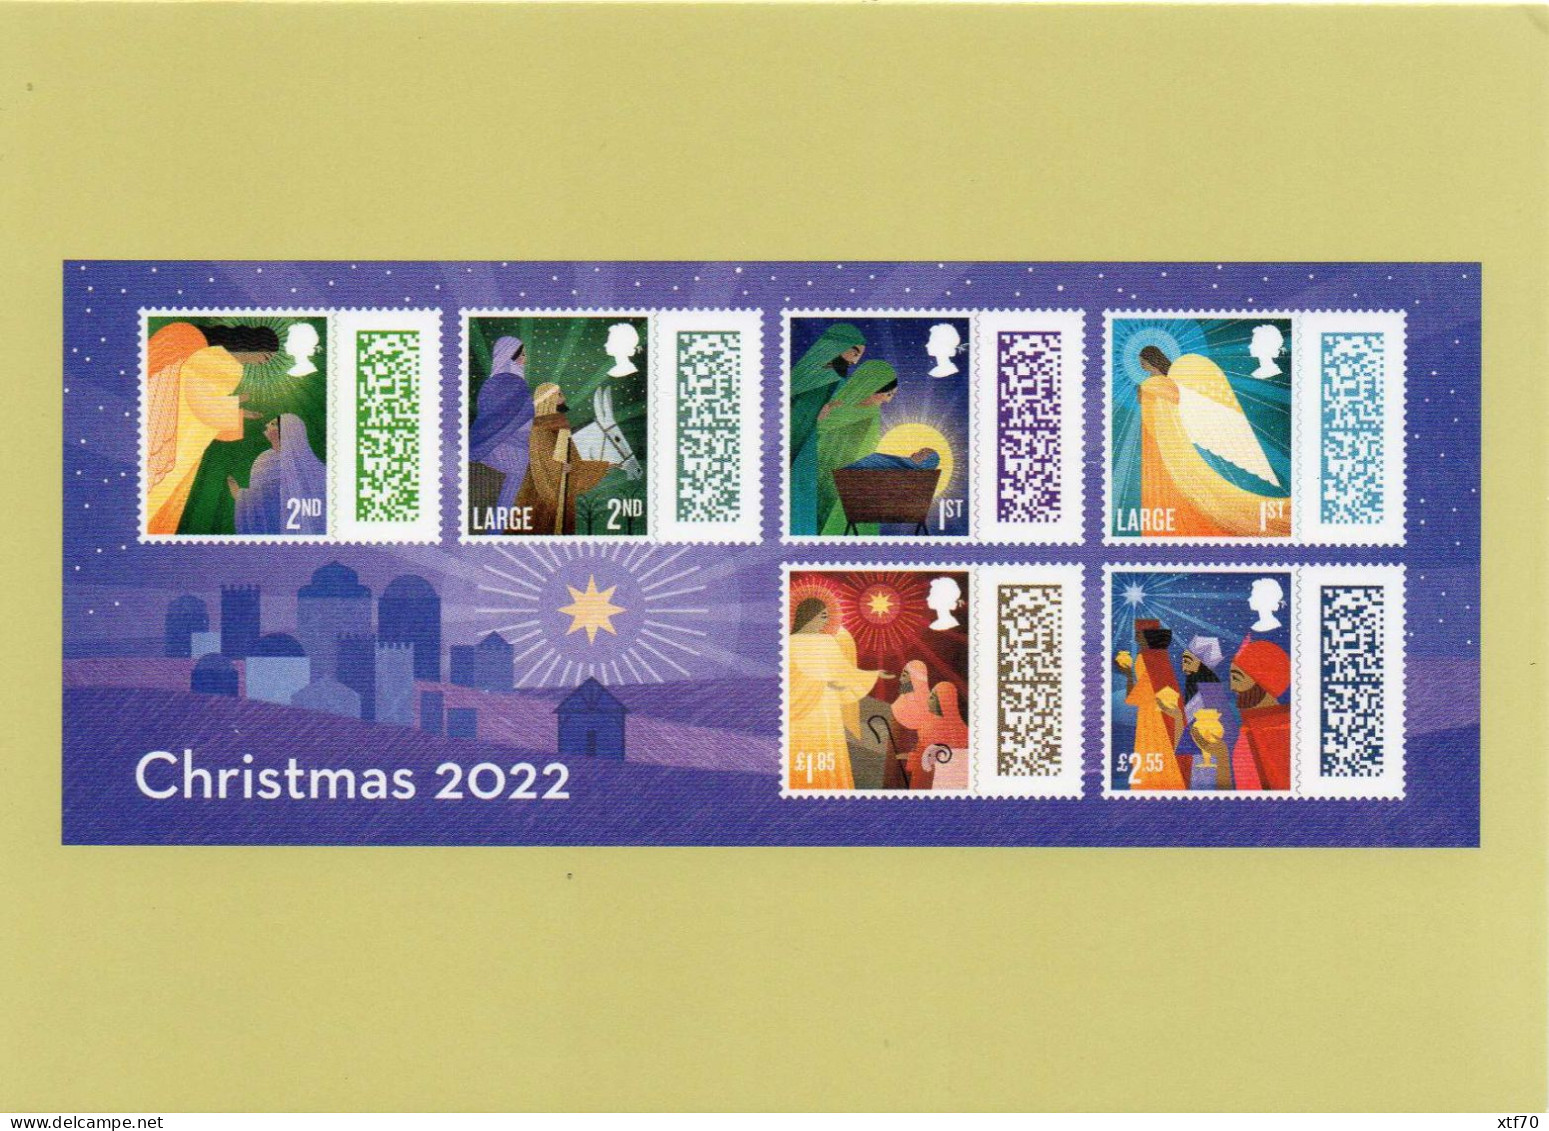 GREAT BRITAIN 2022 Christmas mint PHQ cards